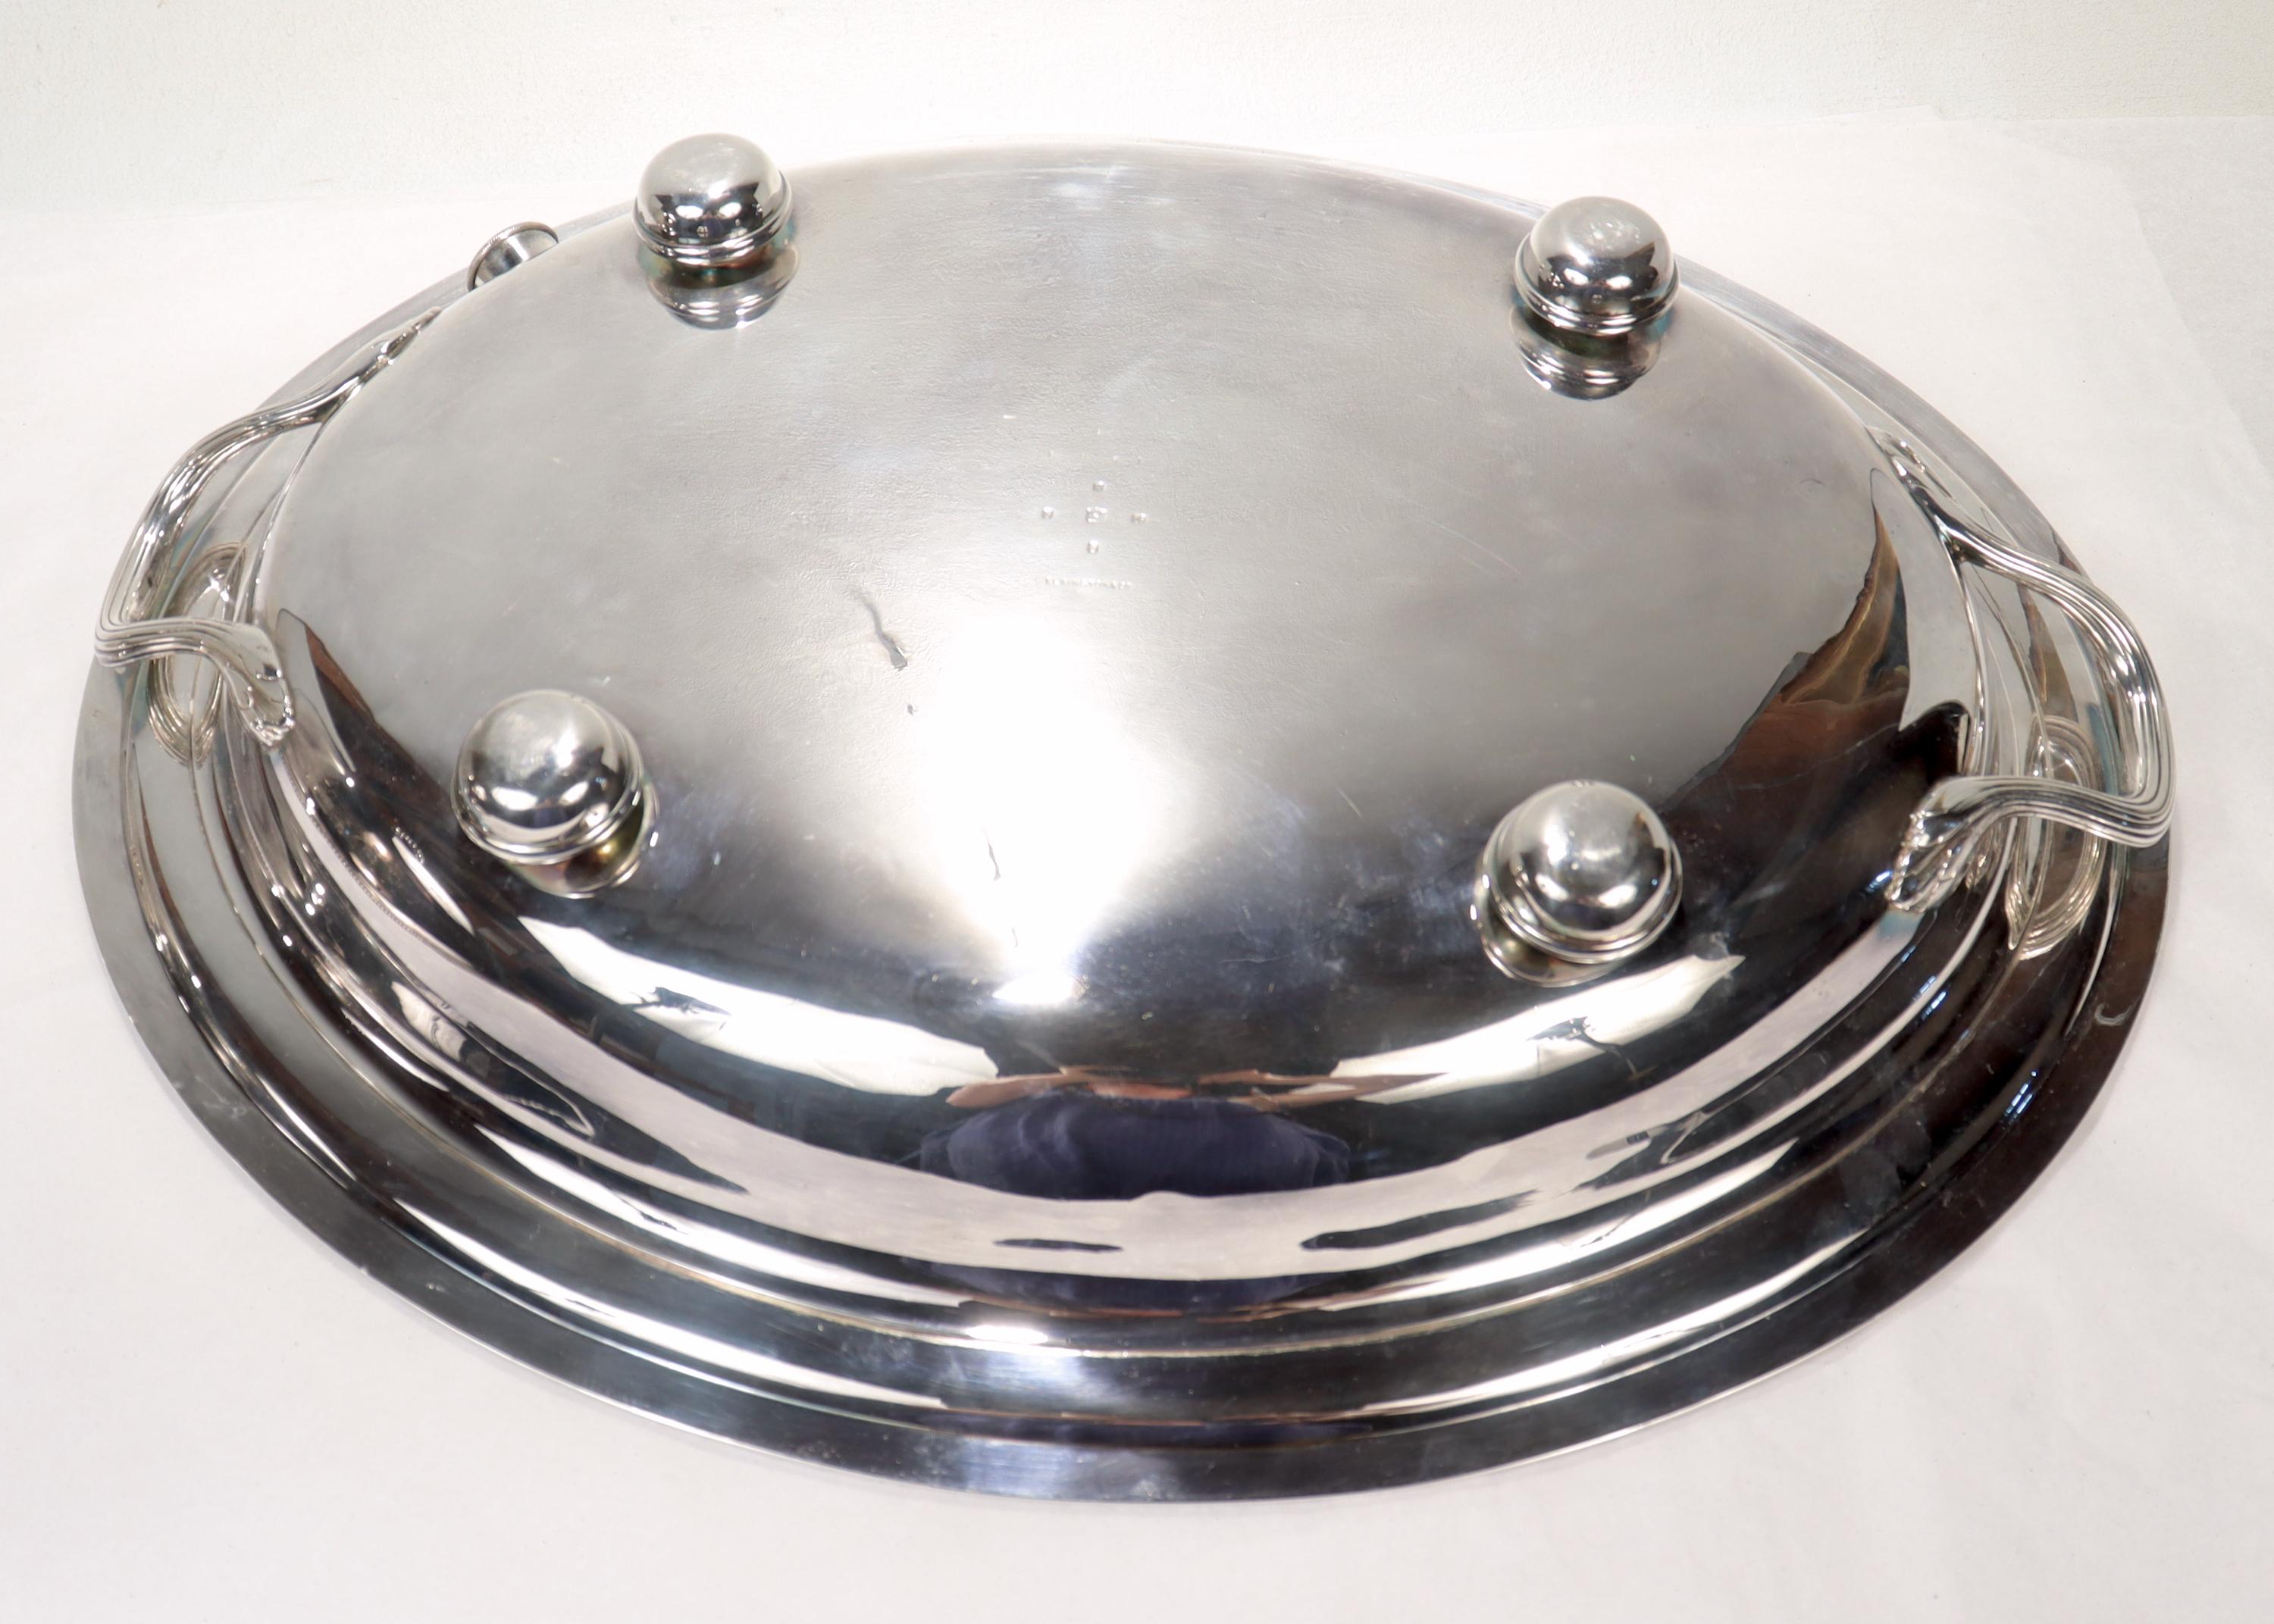 Large Antique Elkington & Co. Armorial Silver Plated Meat Platter & Cover / Dome 7